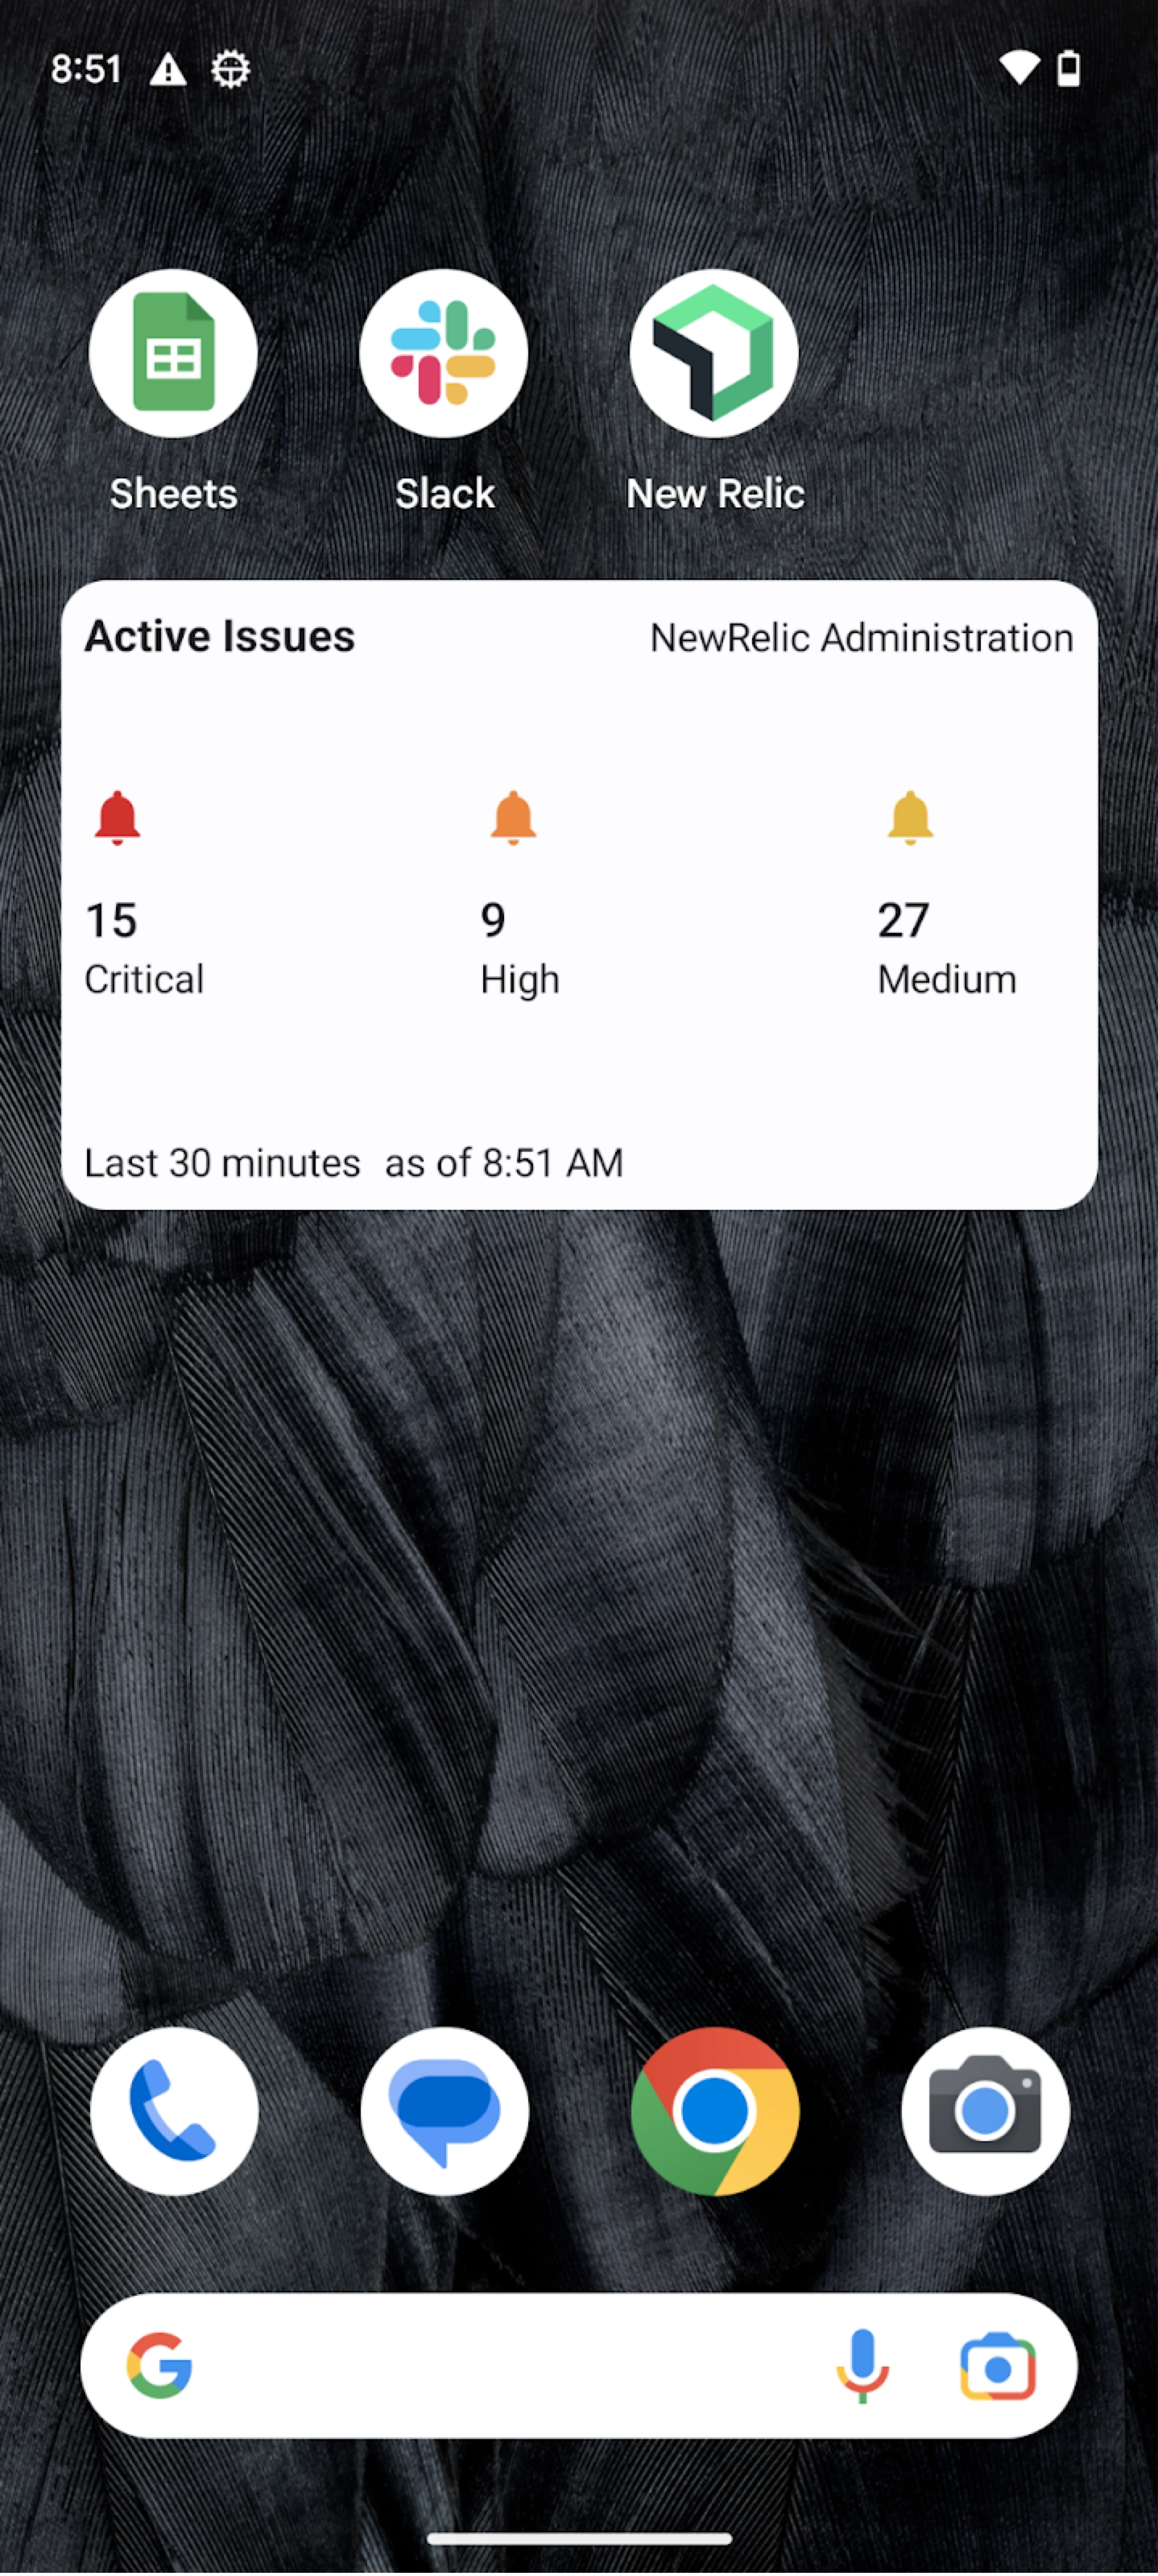 A screenshot of the issue counts widget